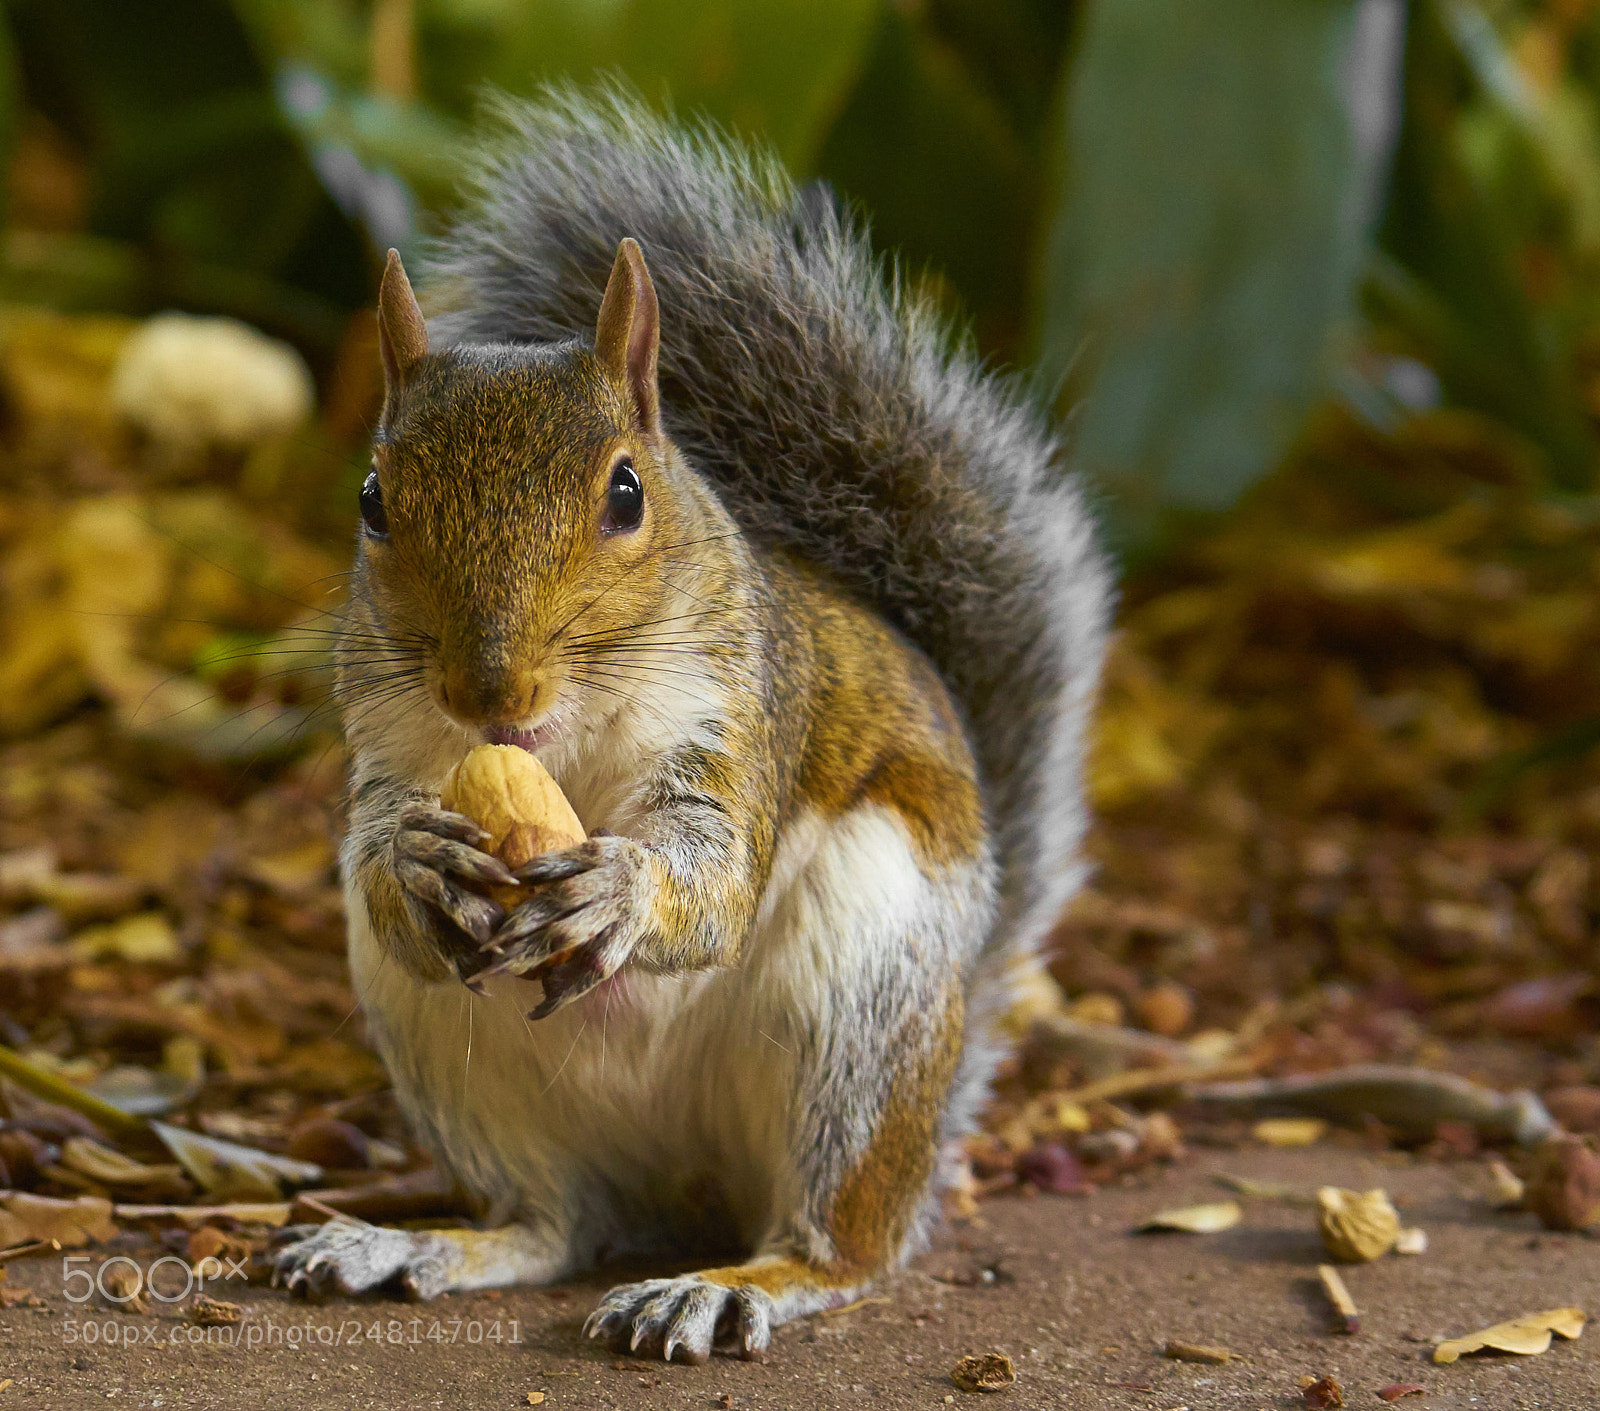 Sony a7 II sample photo. Squirrel eating photography